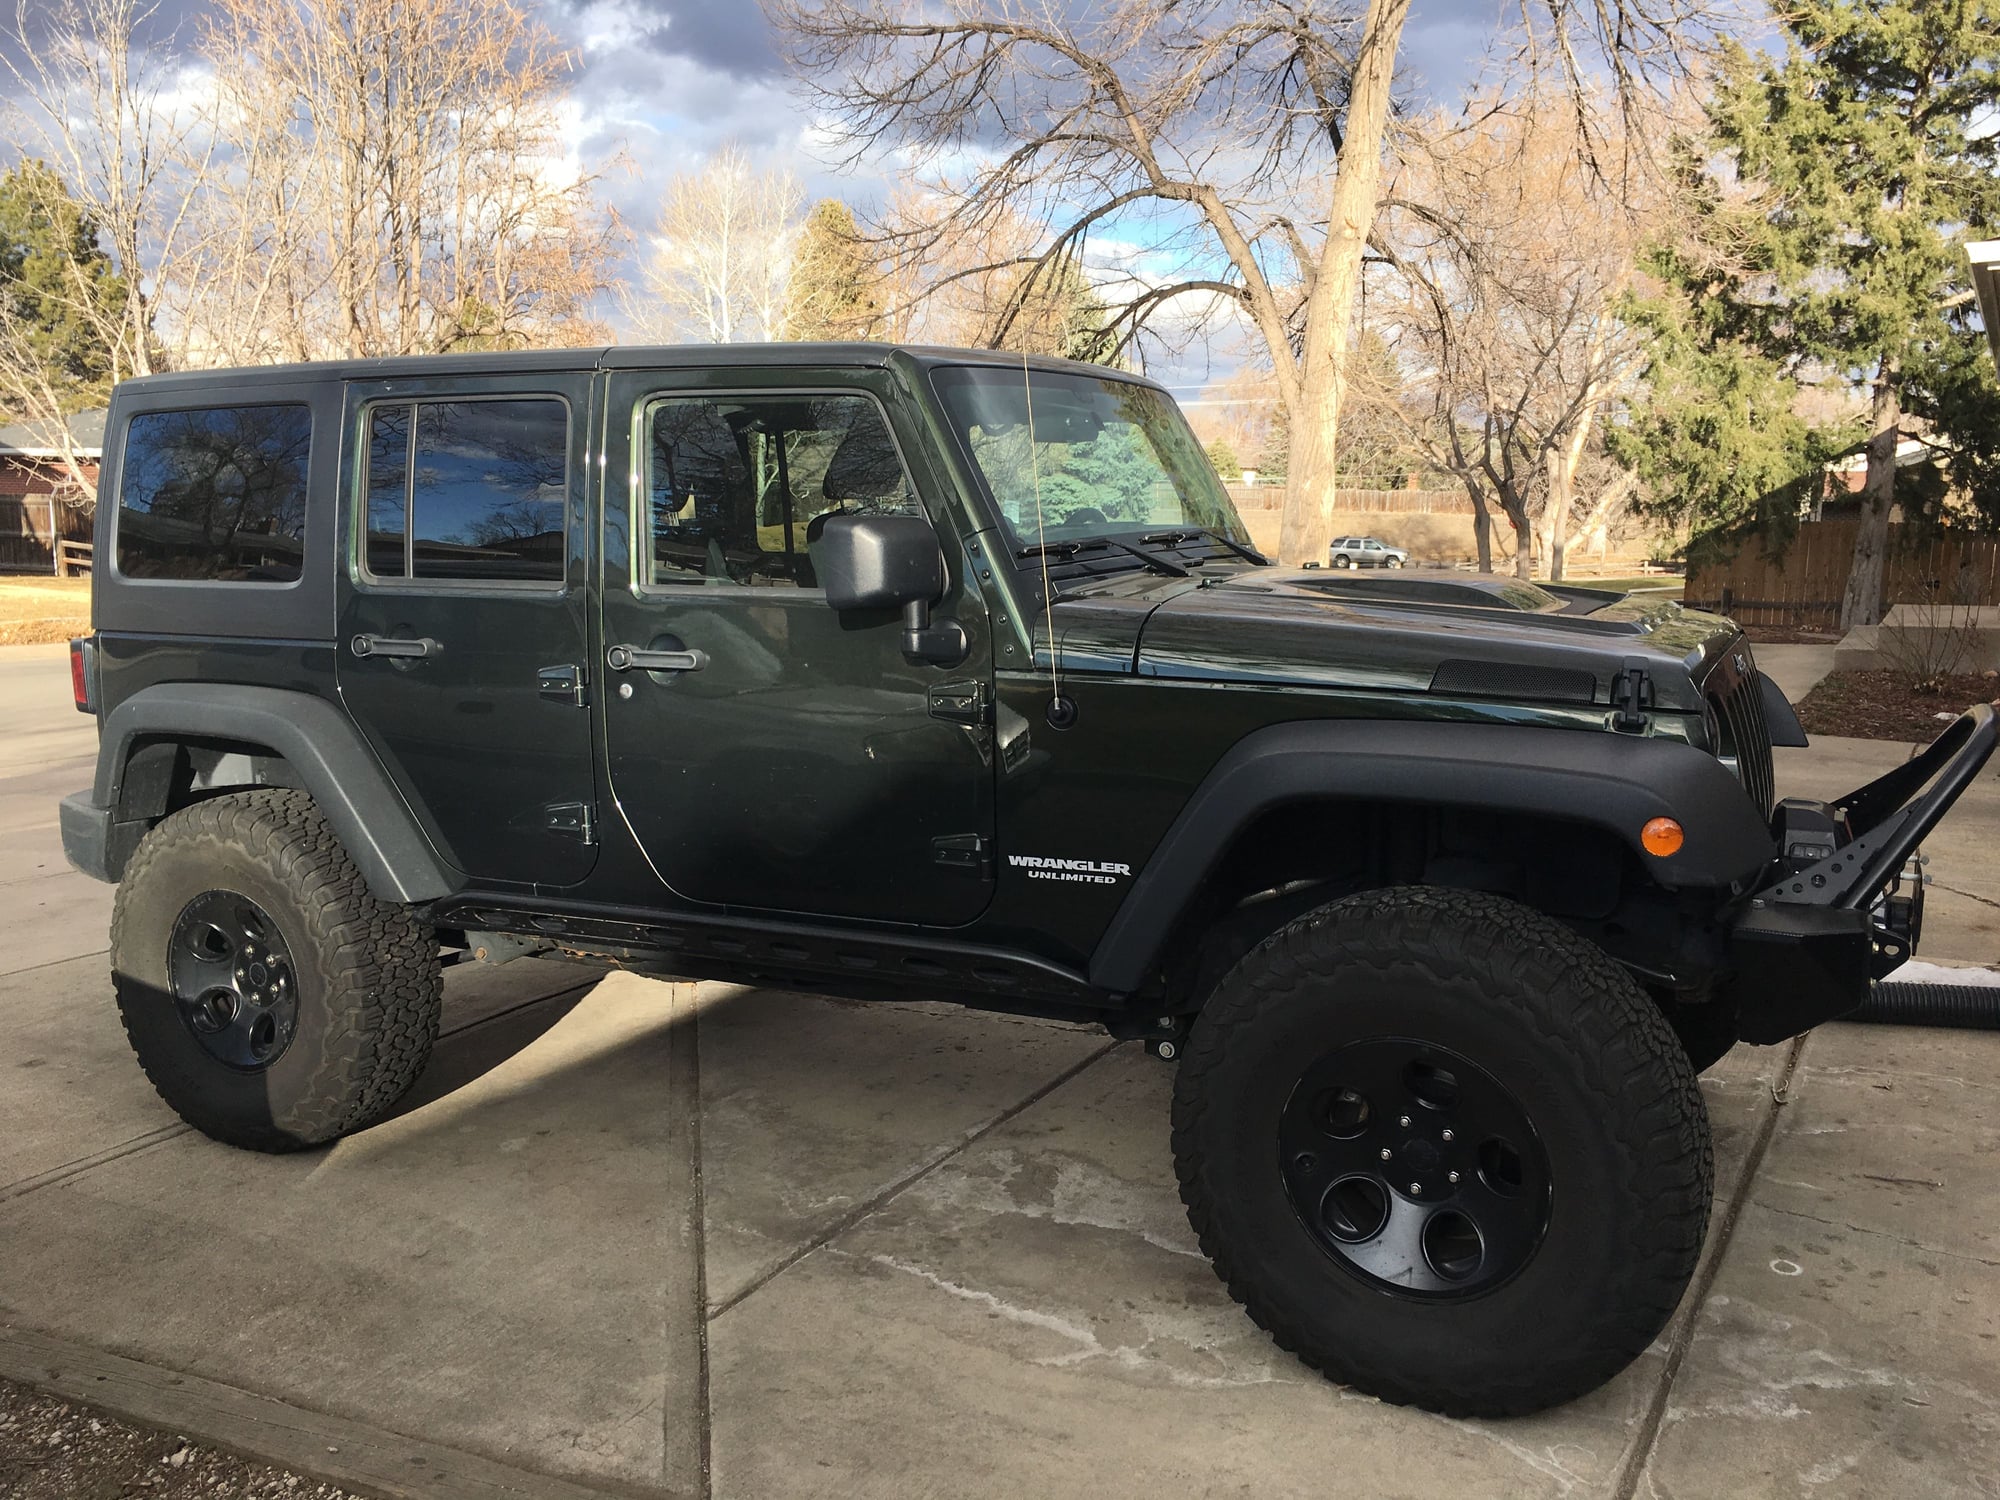 2012 Jeep Wrangler - 2012 Jeep Wrangler Unlimited Rubicon - Used - VIN 00000000000000000 - 37,400 Miles - 6 cyl - 4WD - Automatic - Truck - Other - Lakewood, CO 80228, United States